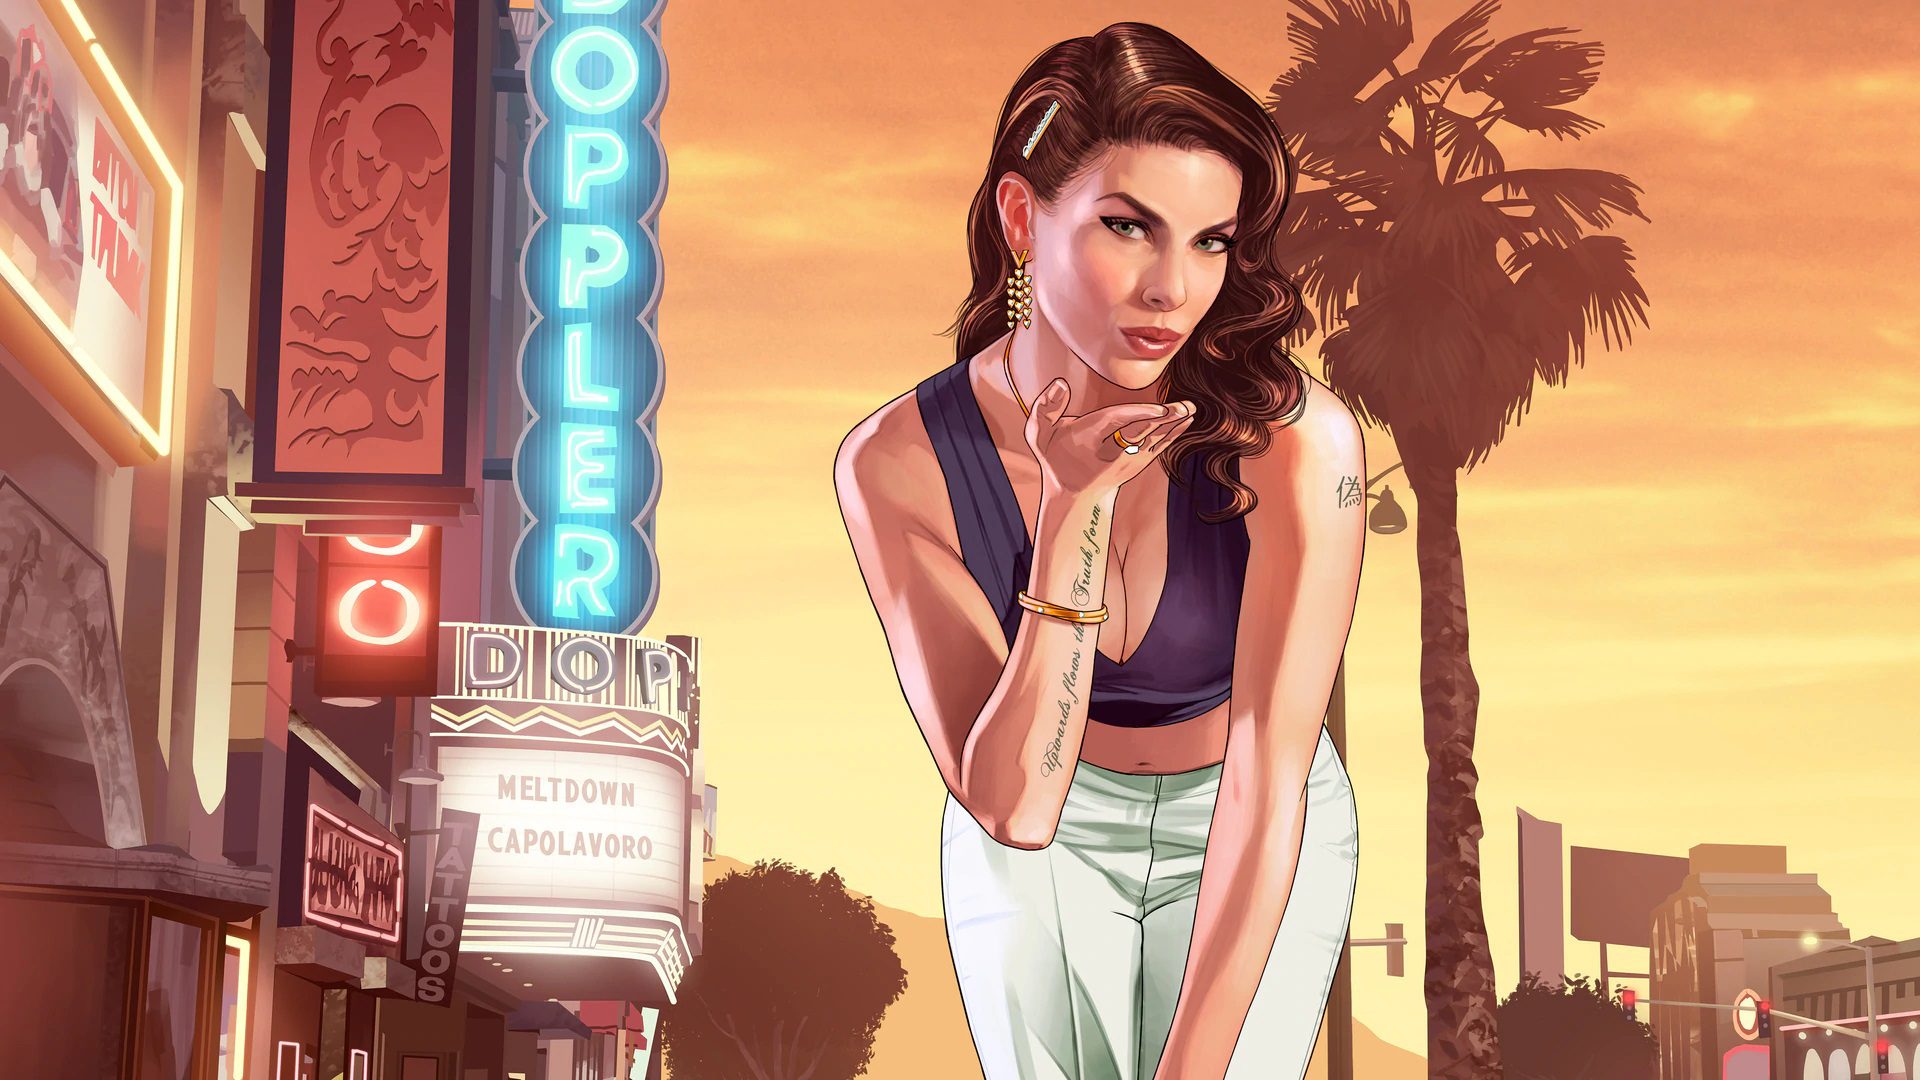 Grand Theft Auto 6 Is In Development, According To Former Rockstar